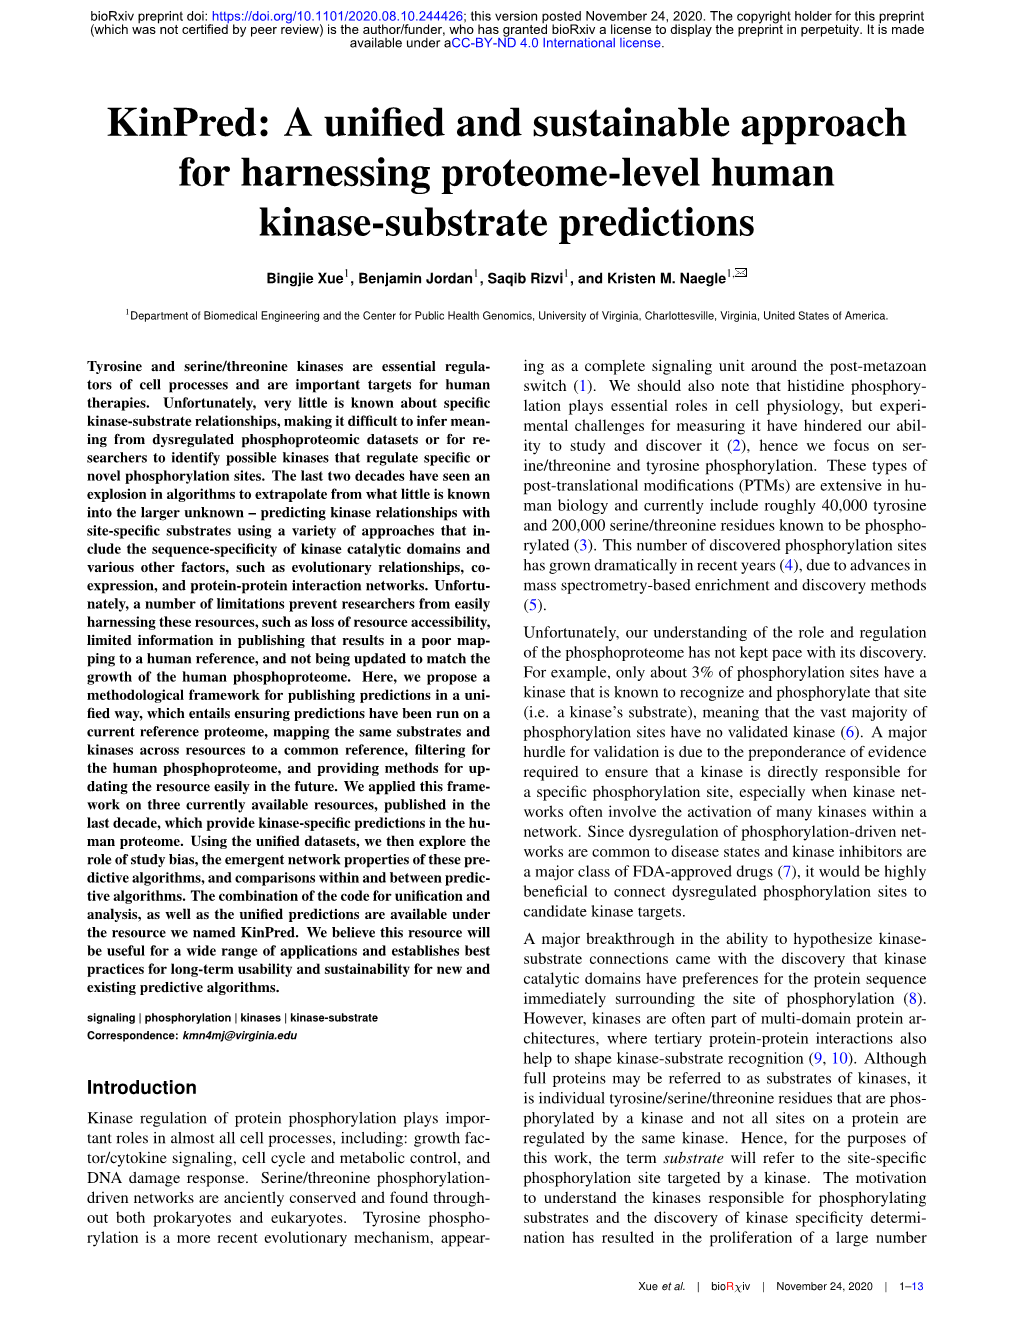 Kinpred: a Unified and Sustainable Approach for Harnessing Proteome